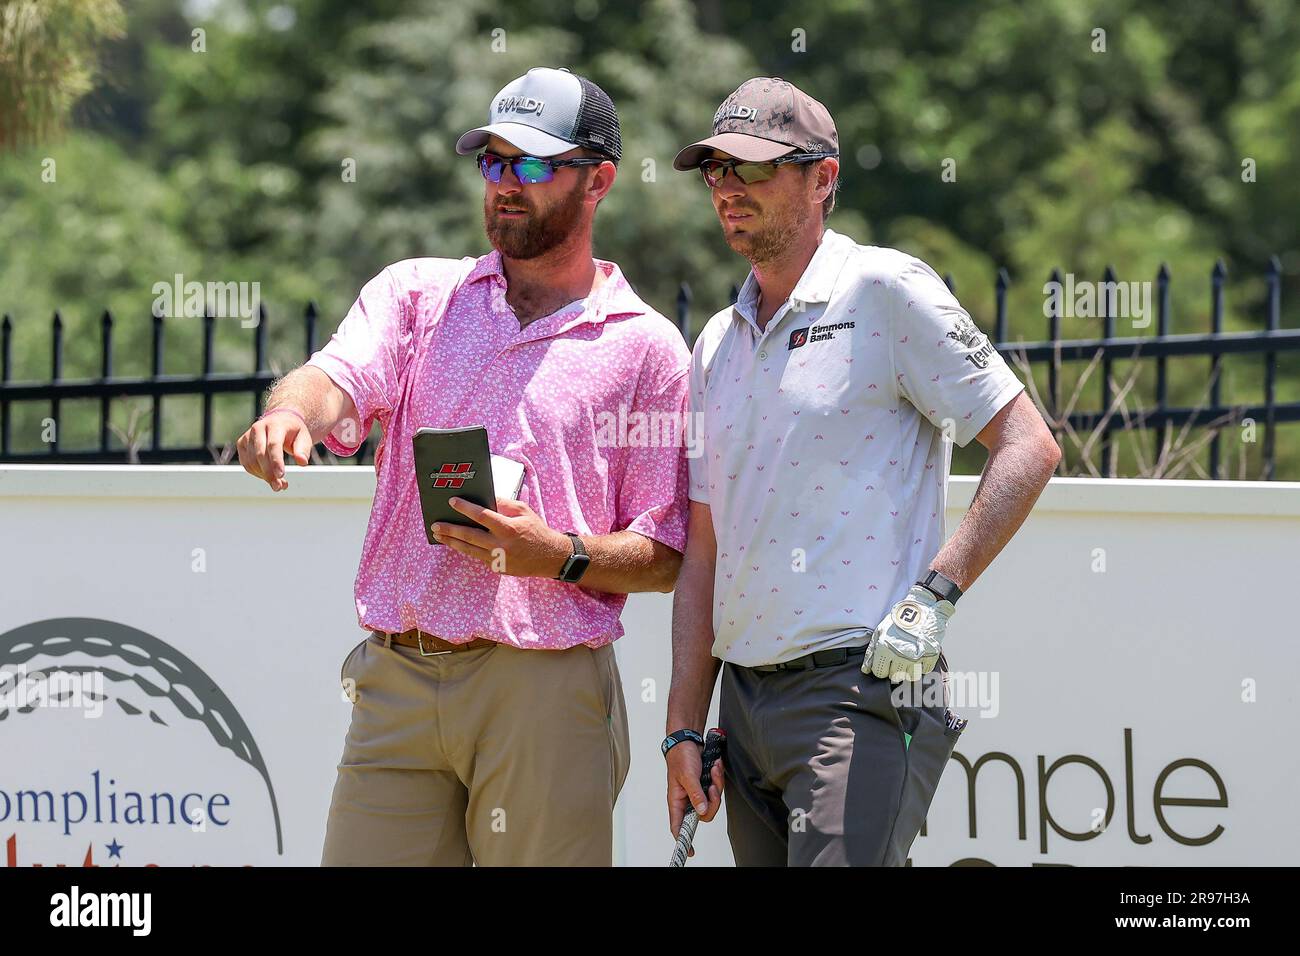 June 24, 2023 Zack Fischer confers with his caddie on the 9th hole during the third round of the Korn Ferry Tour Compliance Solutions Championship golf tournament at Jimmie Austin Golf Club